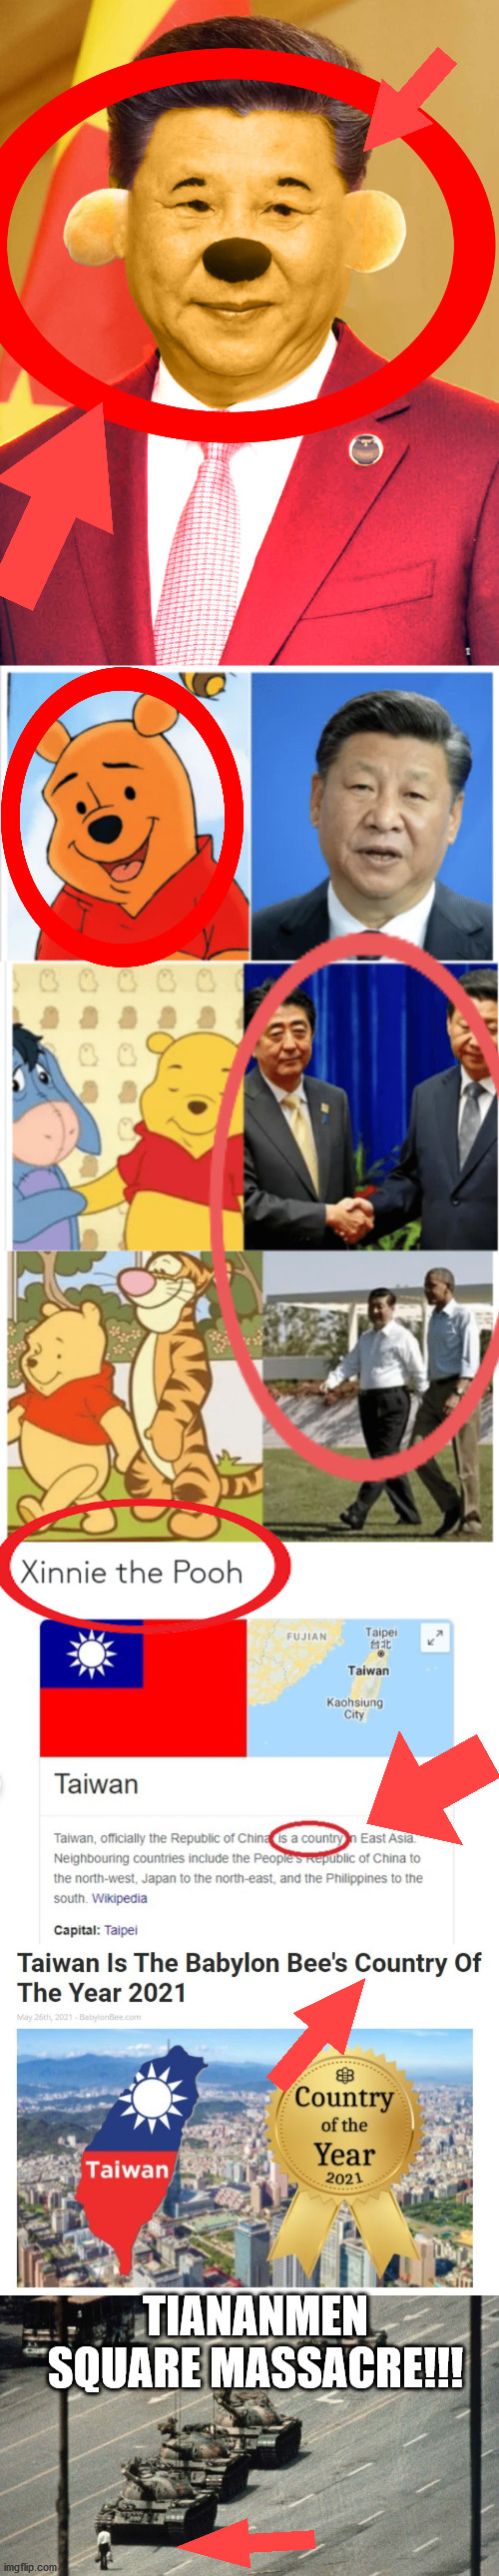 OMG OMG COOL STUFF!!11! | TIANANMEN SQUARE MASSACRE!!! | image tagged in tiannemen square massacre,xinnie the pooh,taiwan is a country | made w/ Imgflip meme maker